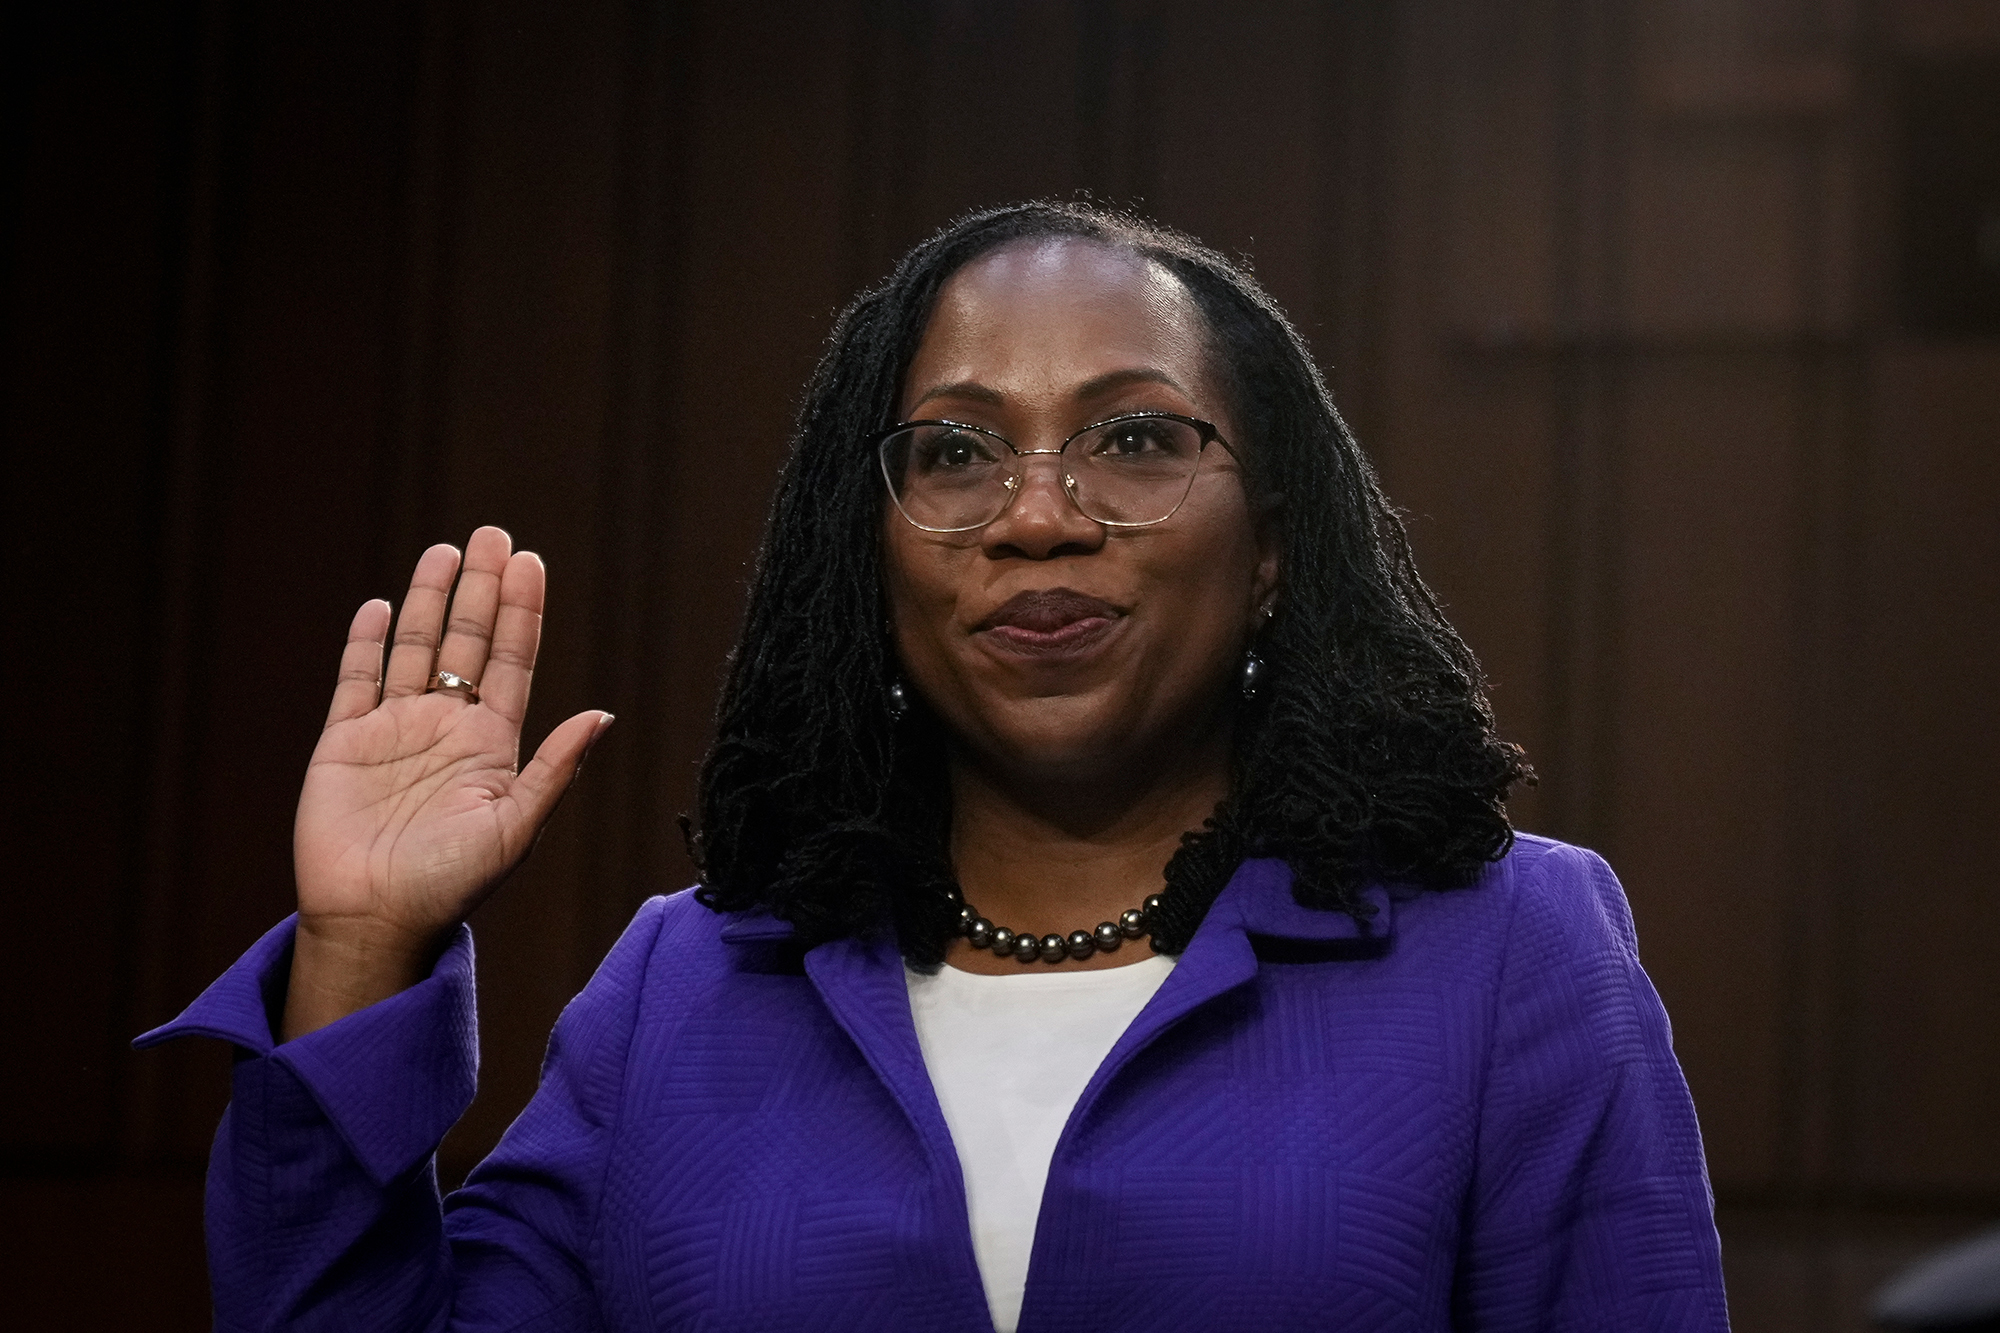 Judge Ketanji Brown Jackson is sworn in during her confirmation hearing before the Senate Judiciary Committee on March 21 in Washington, DC.